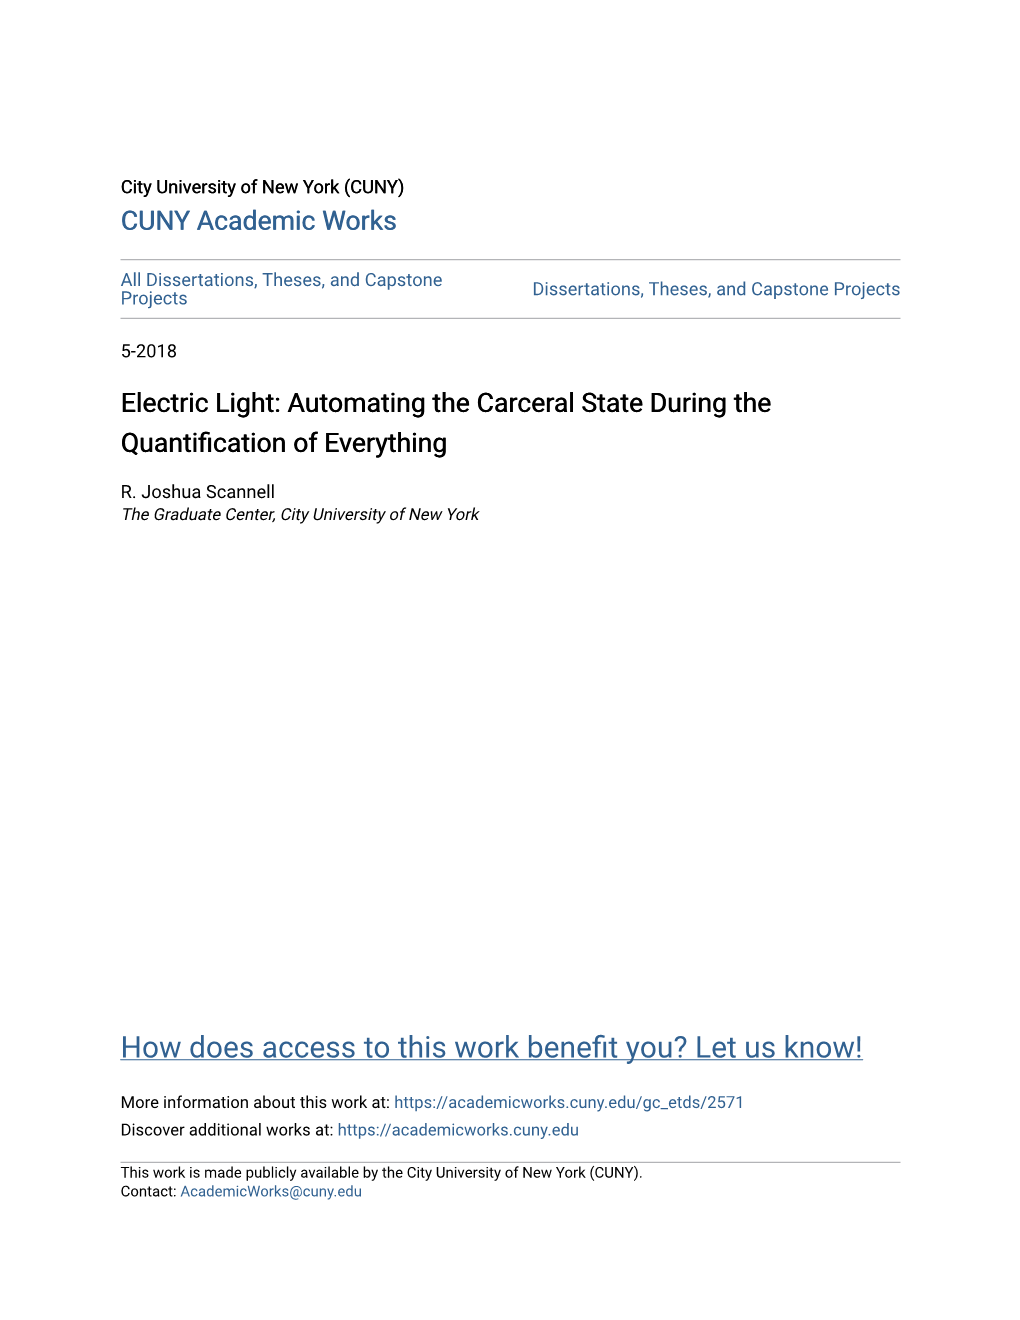 Electric Light: Automating the Carceral State During the Quantification of Ve Erything